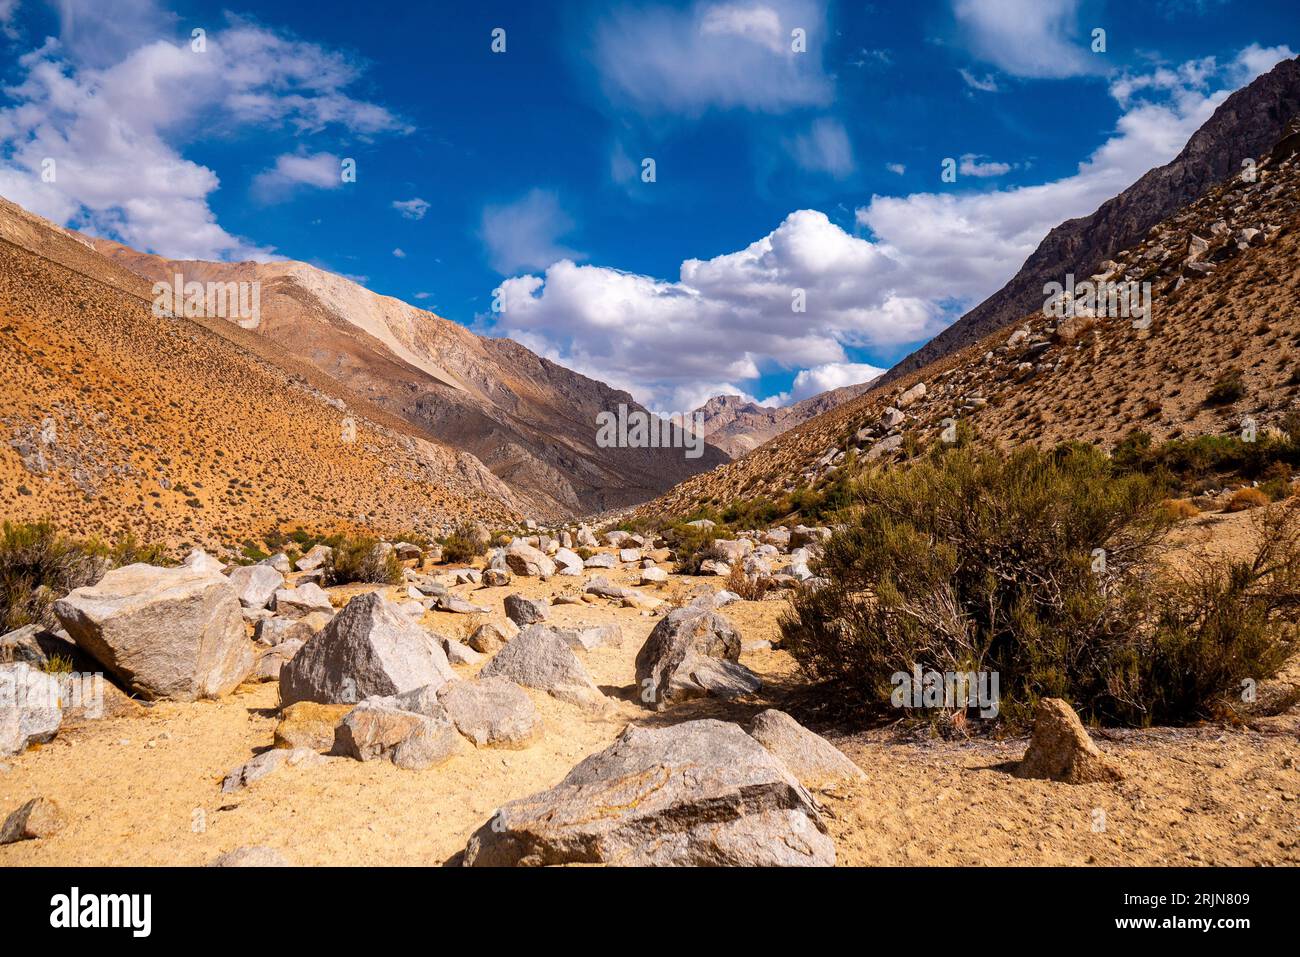 A picturesque mountain landscape with towering rocks in Cochiguaz, Valle del Elqui, Chile Stock Photo